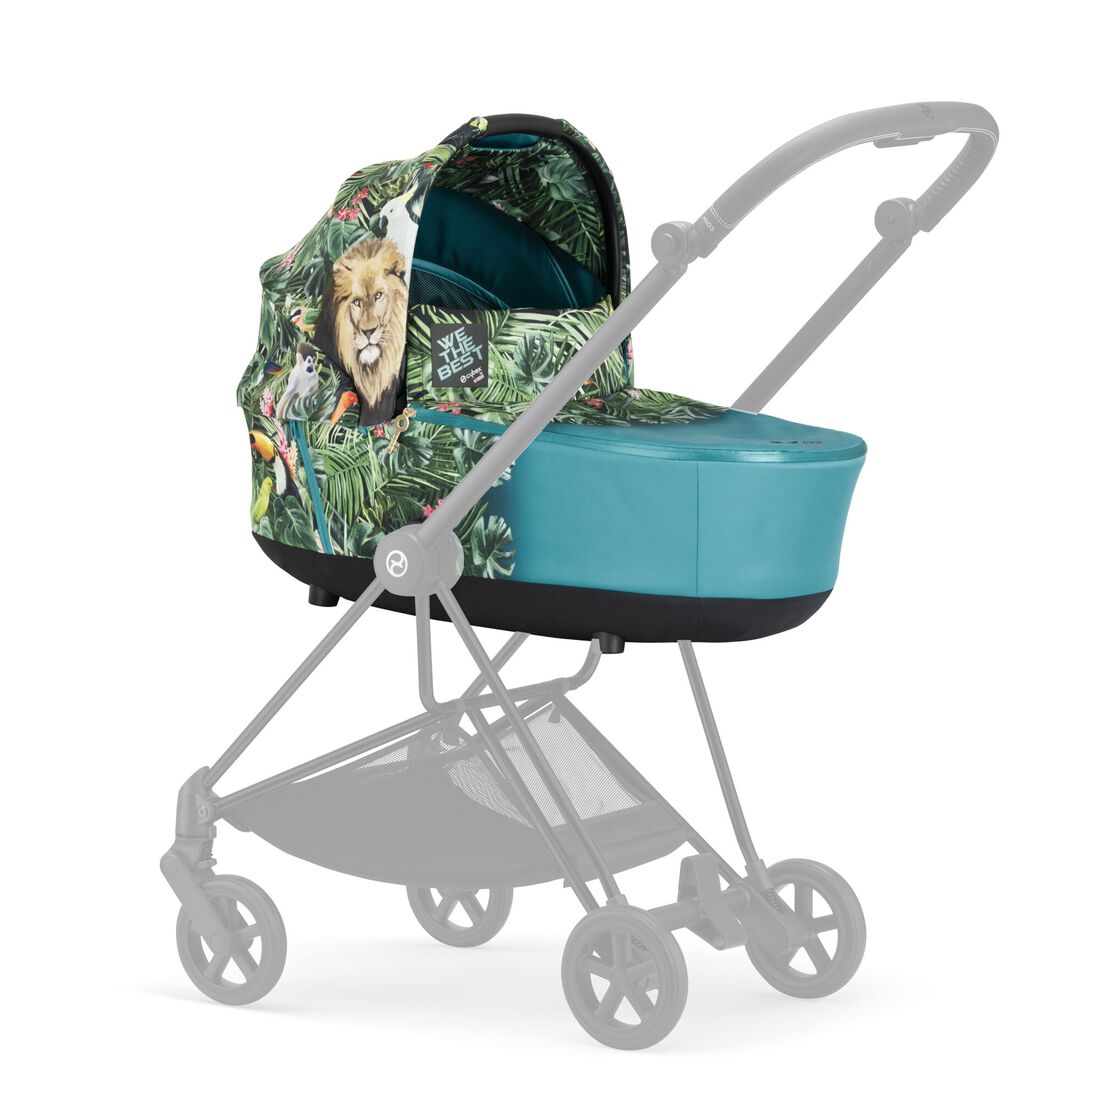 Navicella Mios Lux Carry Cot_ Collezione “We the Best” by DJ Khaled